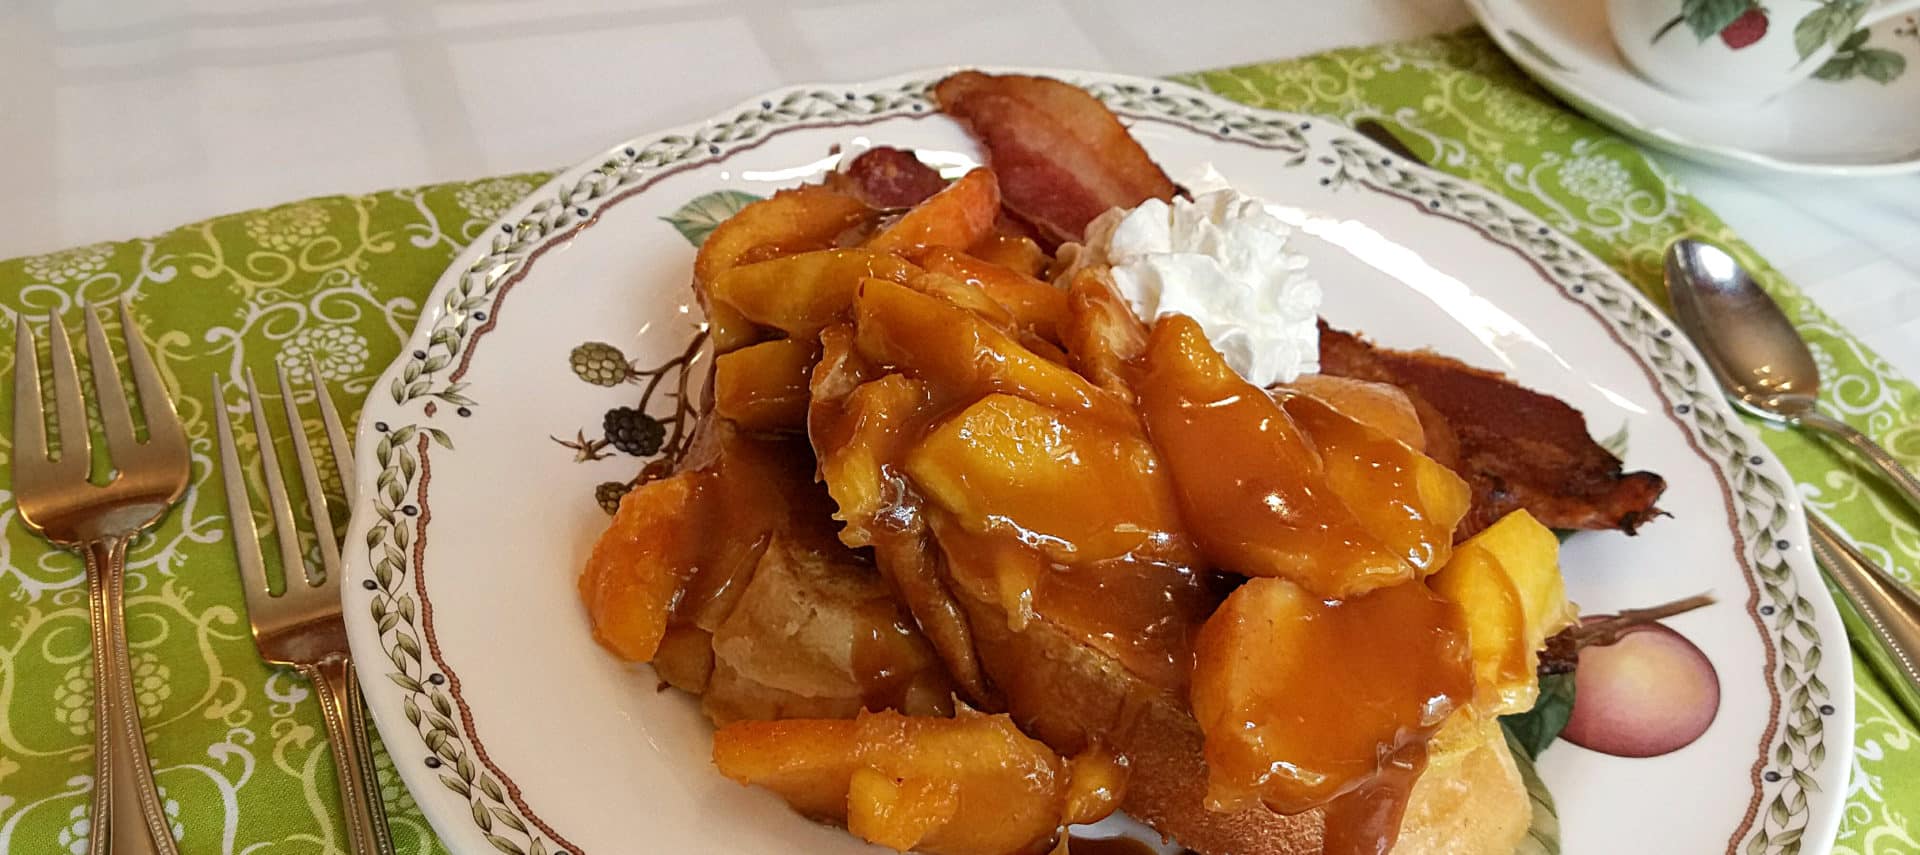 French toast topped with peaches and whipped cream with bacon on china plate.